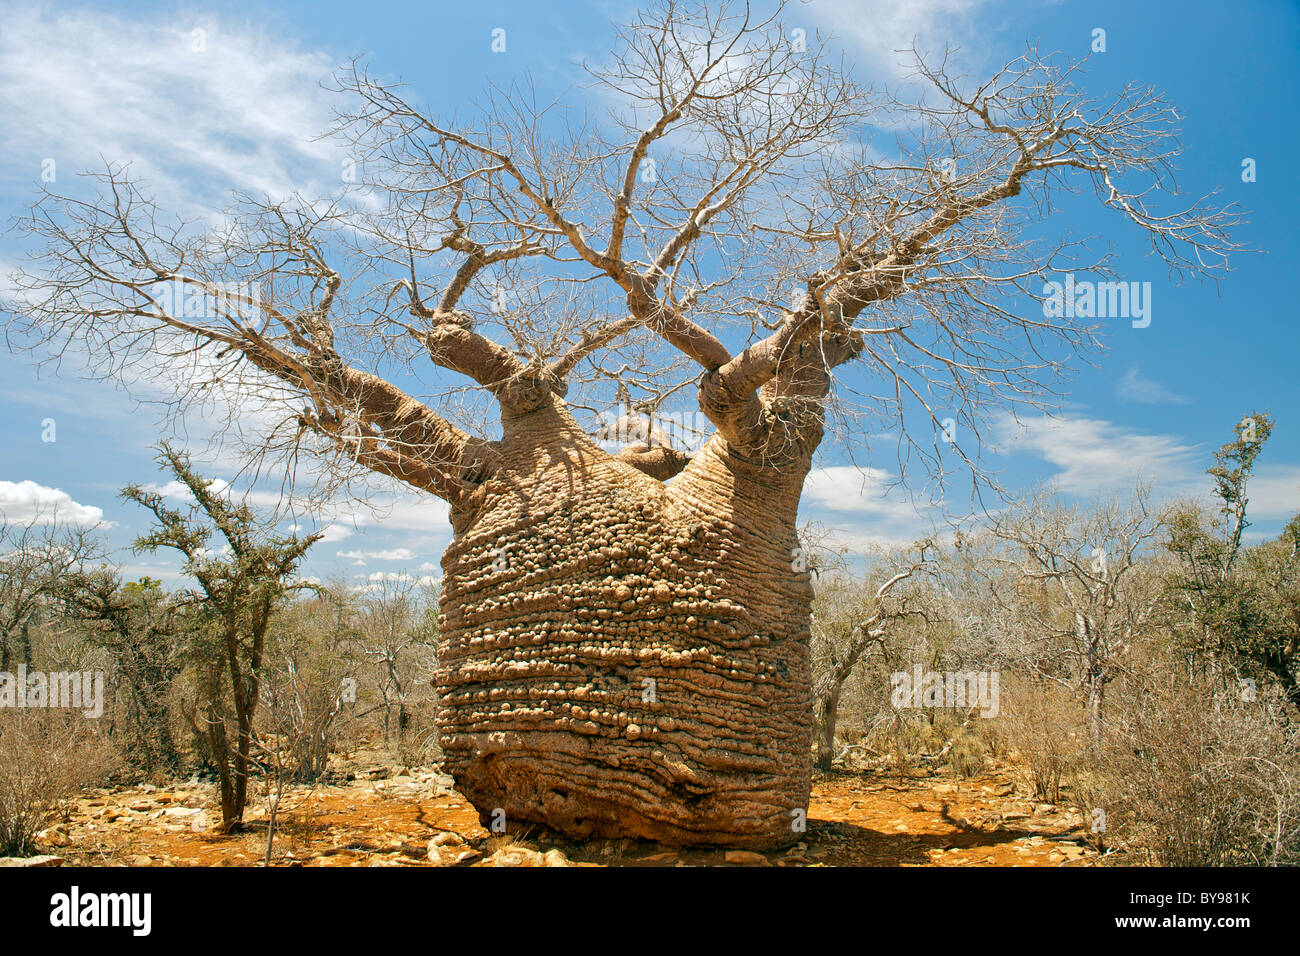 Baobab Tree High Resolution Stock Photography And Images Alamy